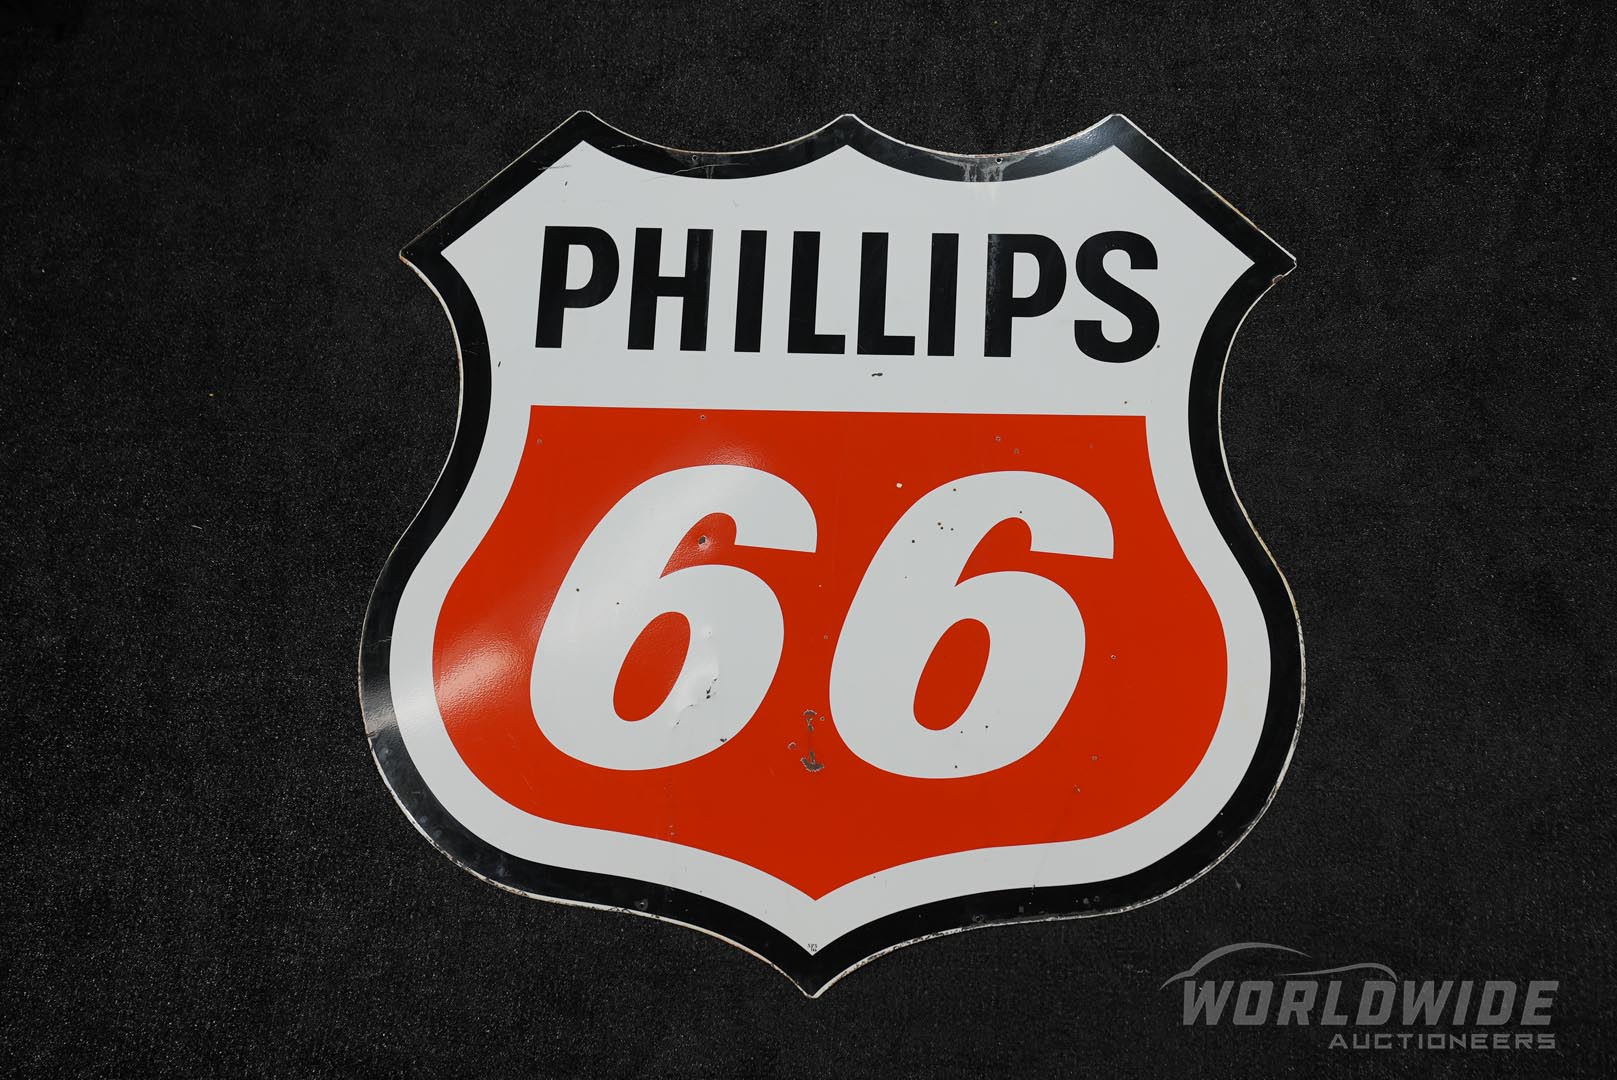 Large Phillips 66 Shield Double-Sided Porcelain Sign